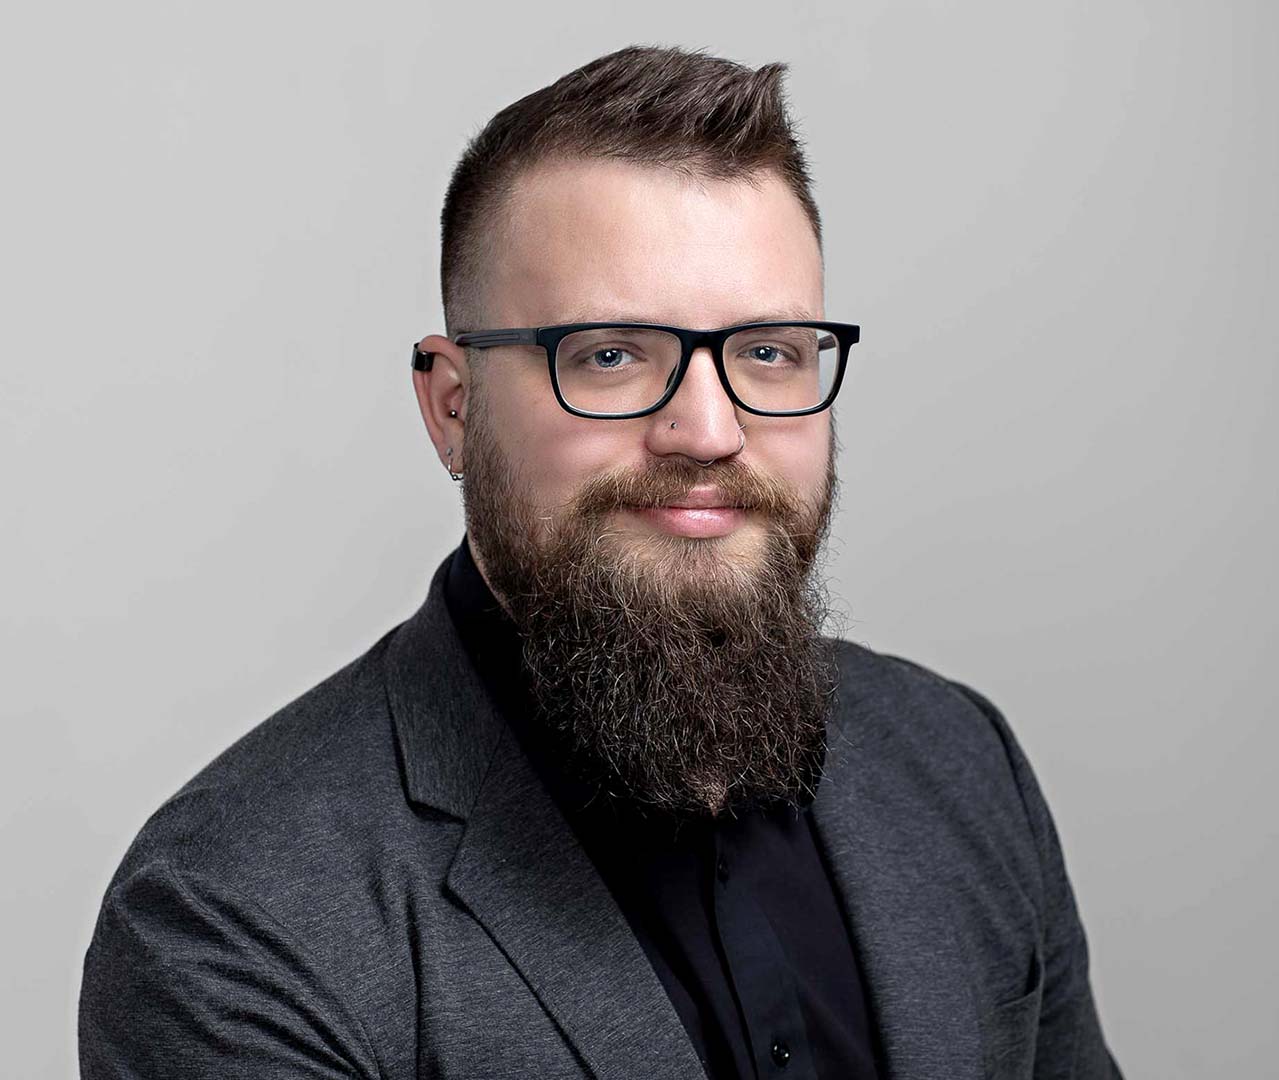 young man with beard poses for an executive portrait wearing black glasses, grey suit and black shirt